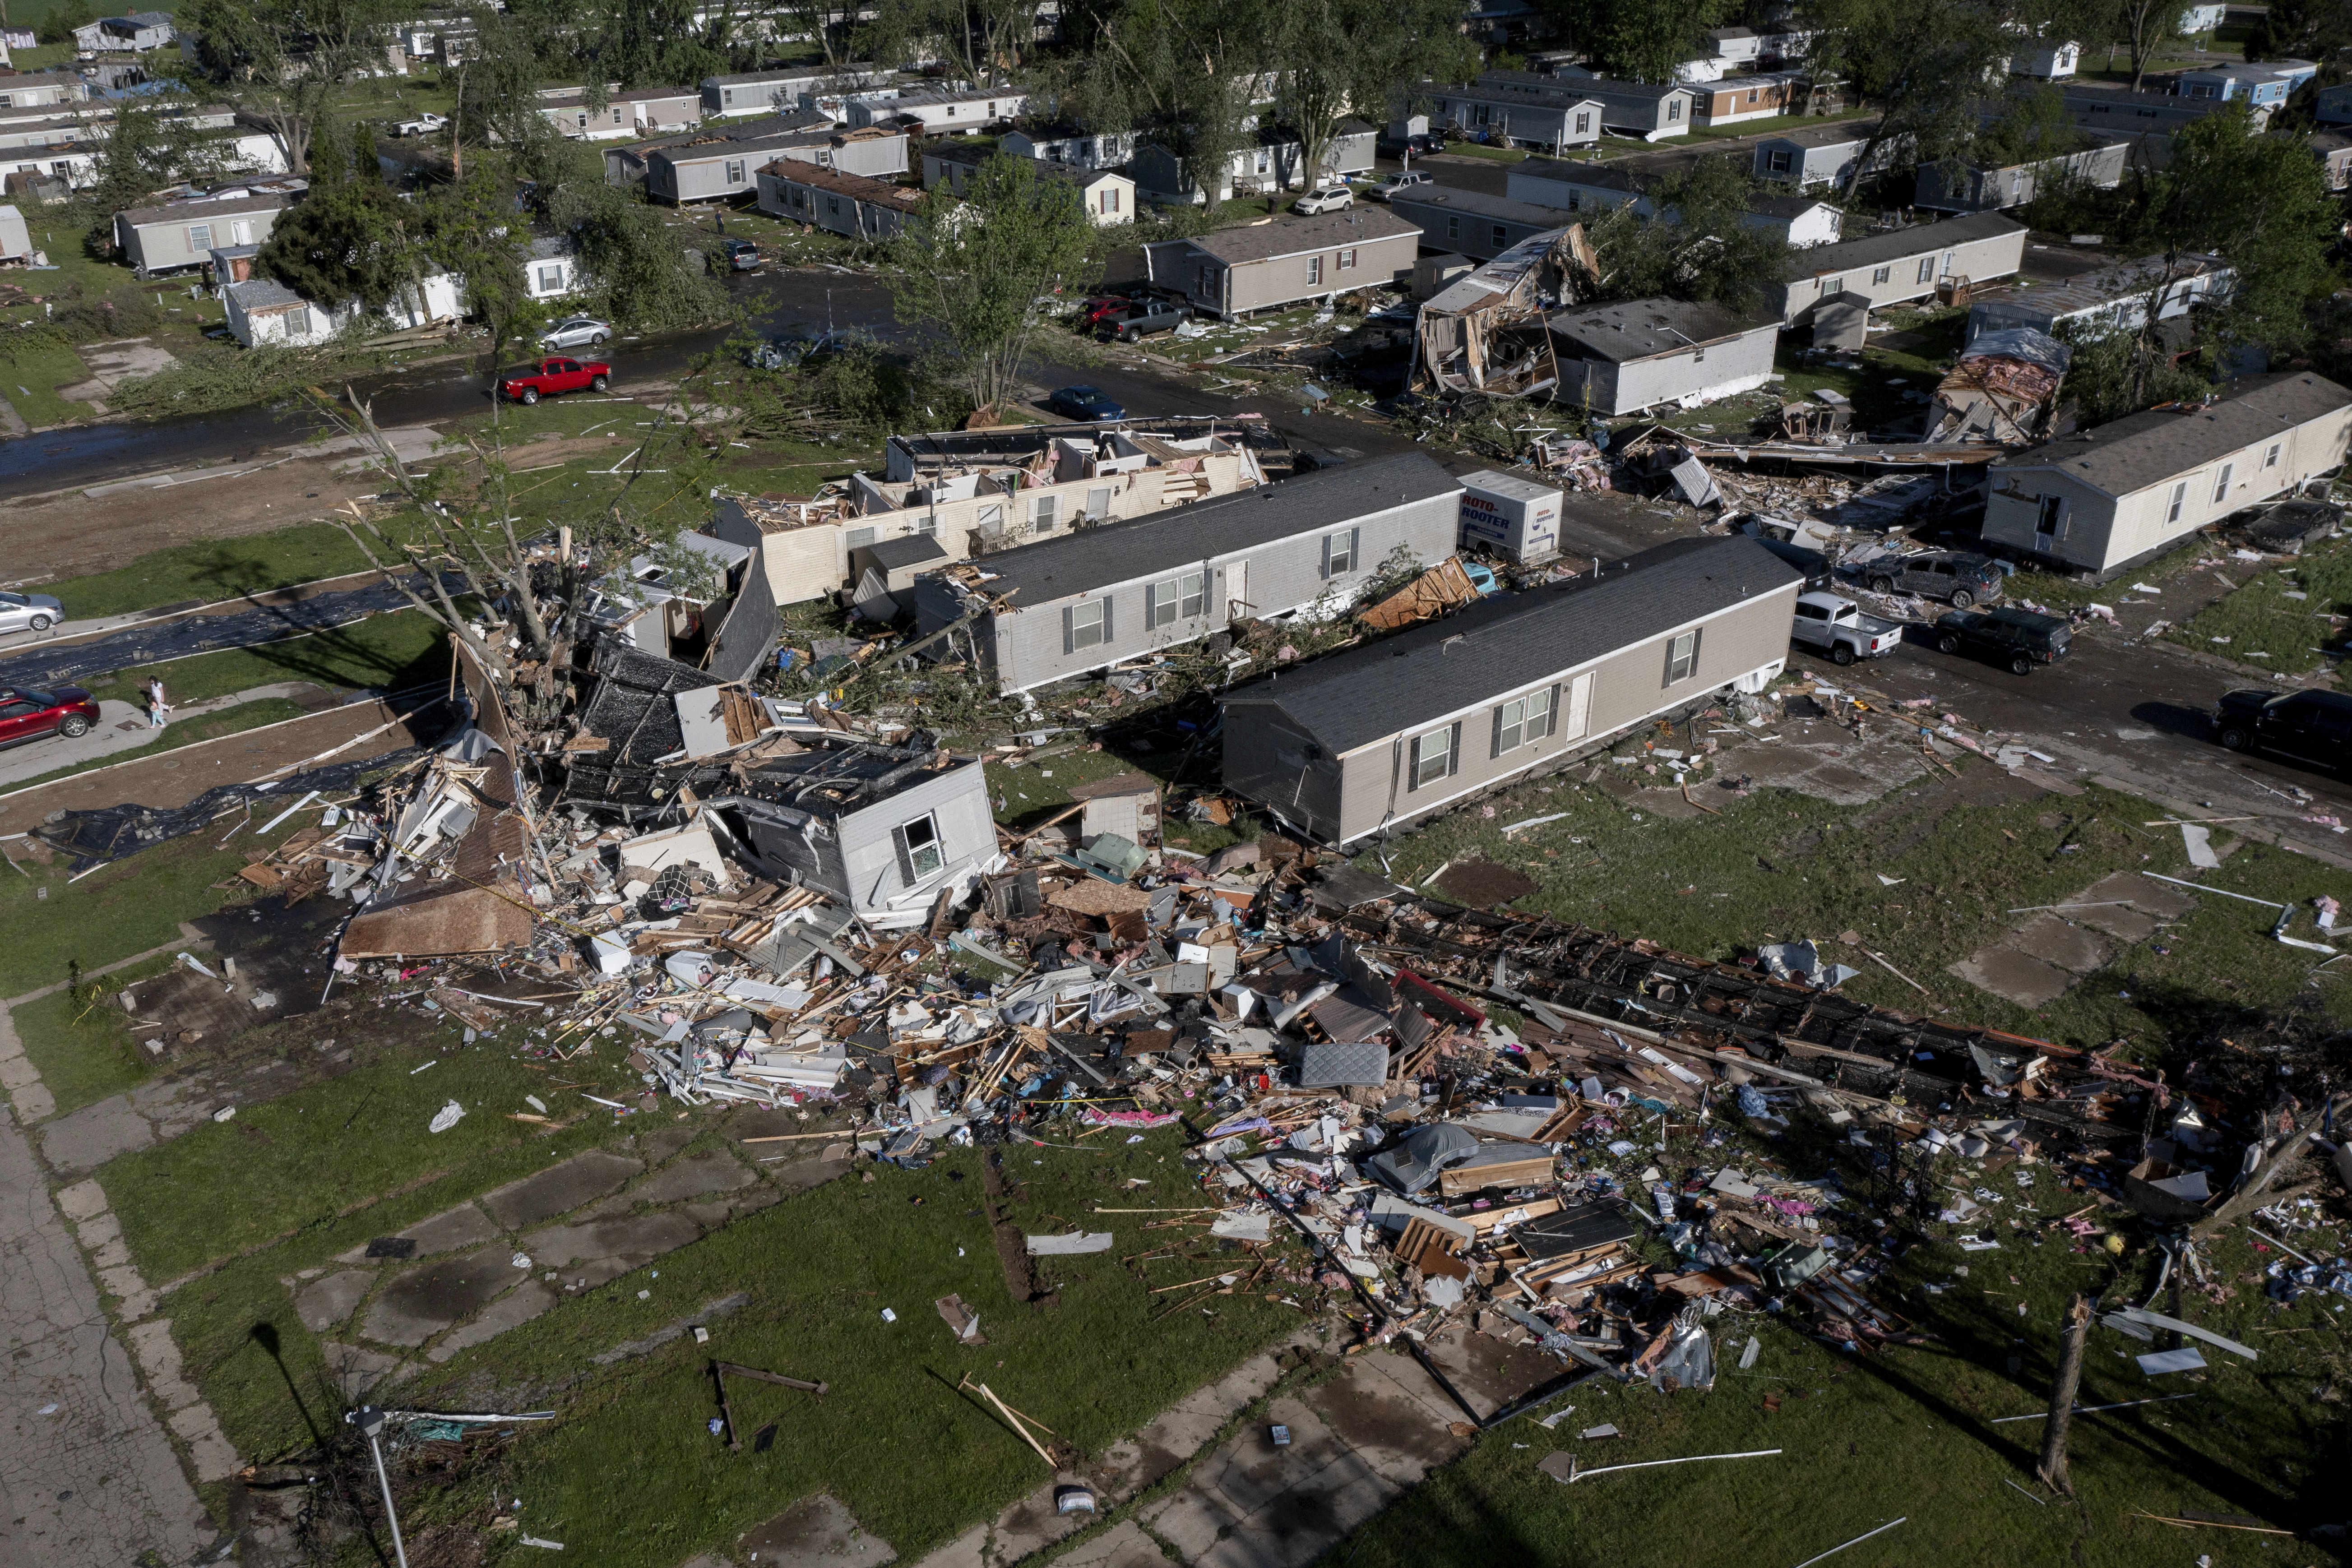 After tornado outbreaks in the U.S., could Canada see similar storms?